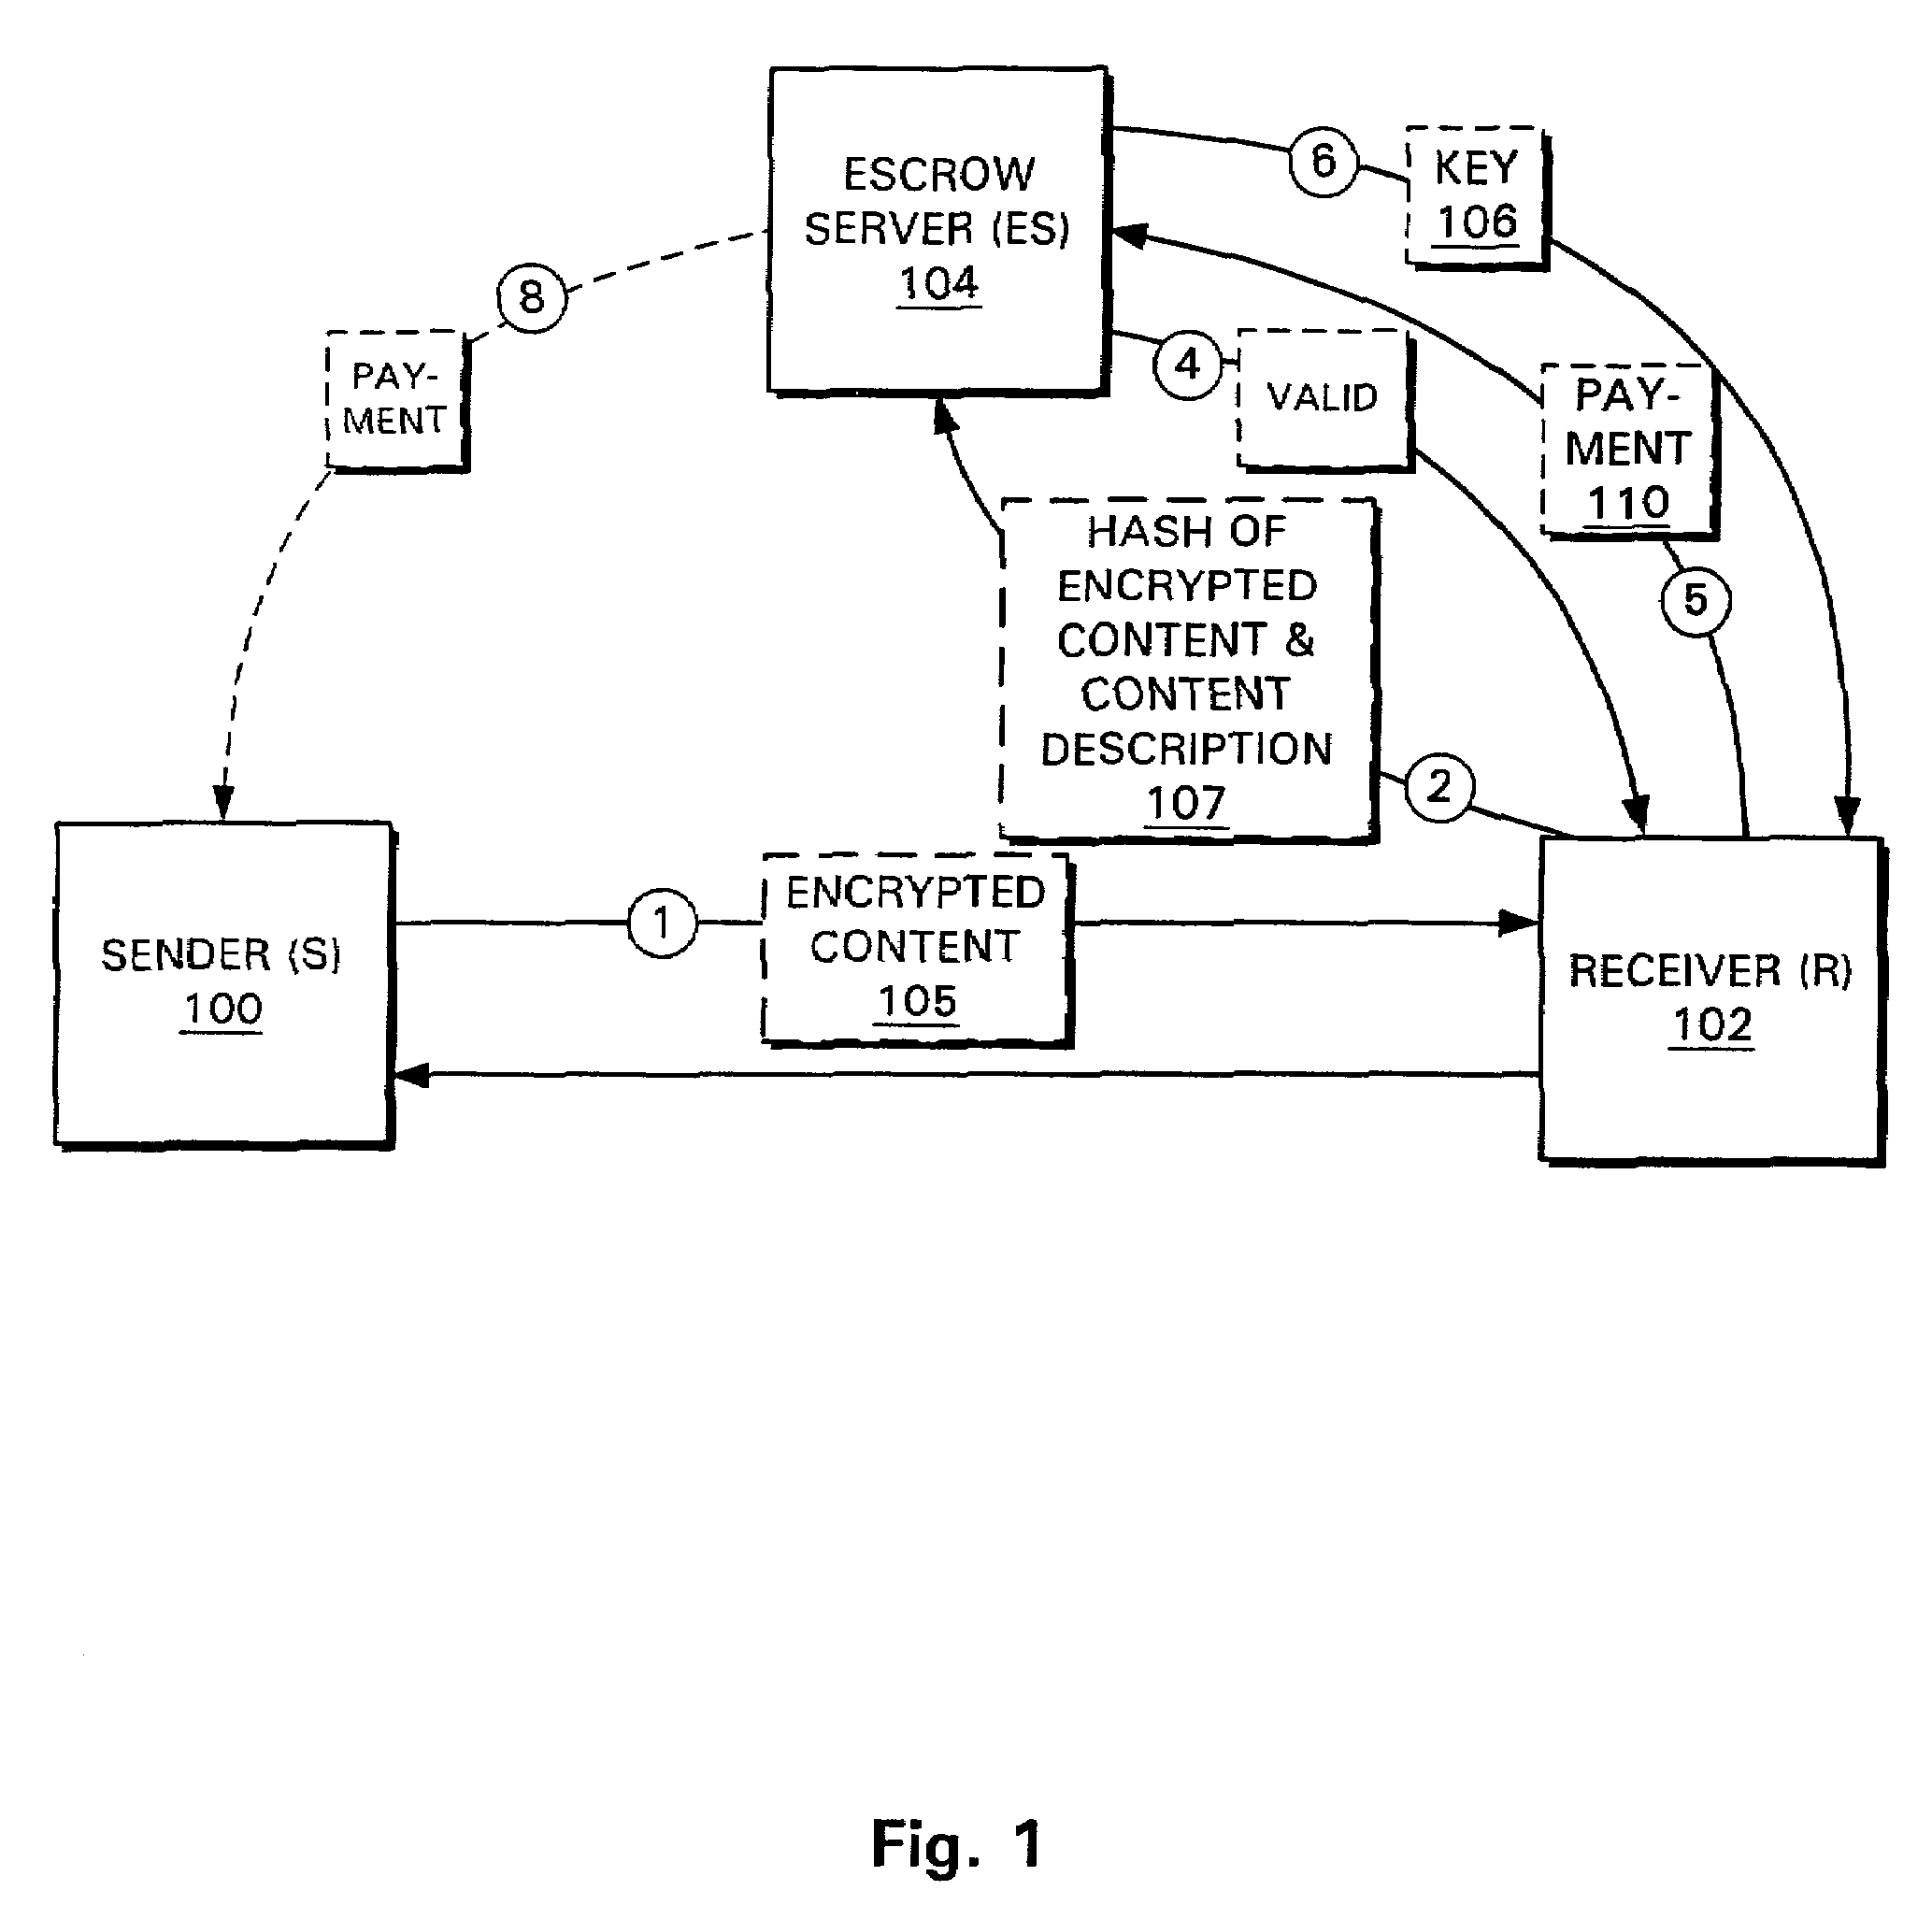 Systems and methods for conducting transactions and communications using a trusted third party